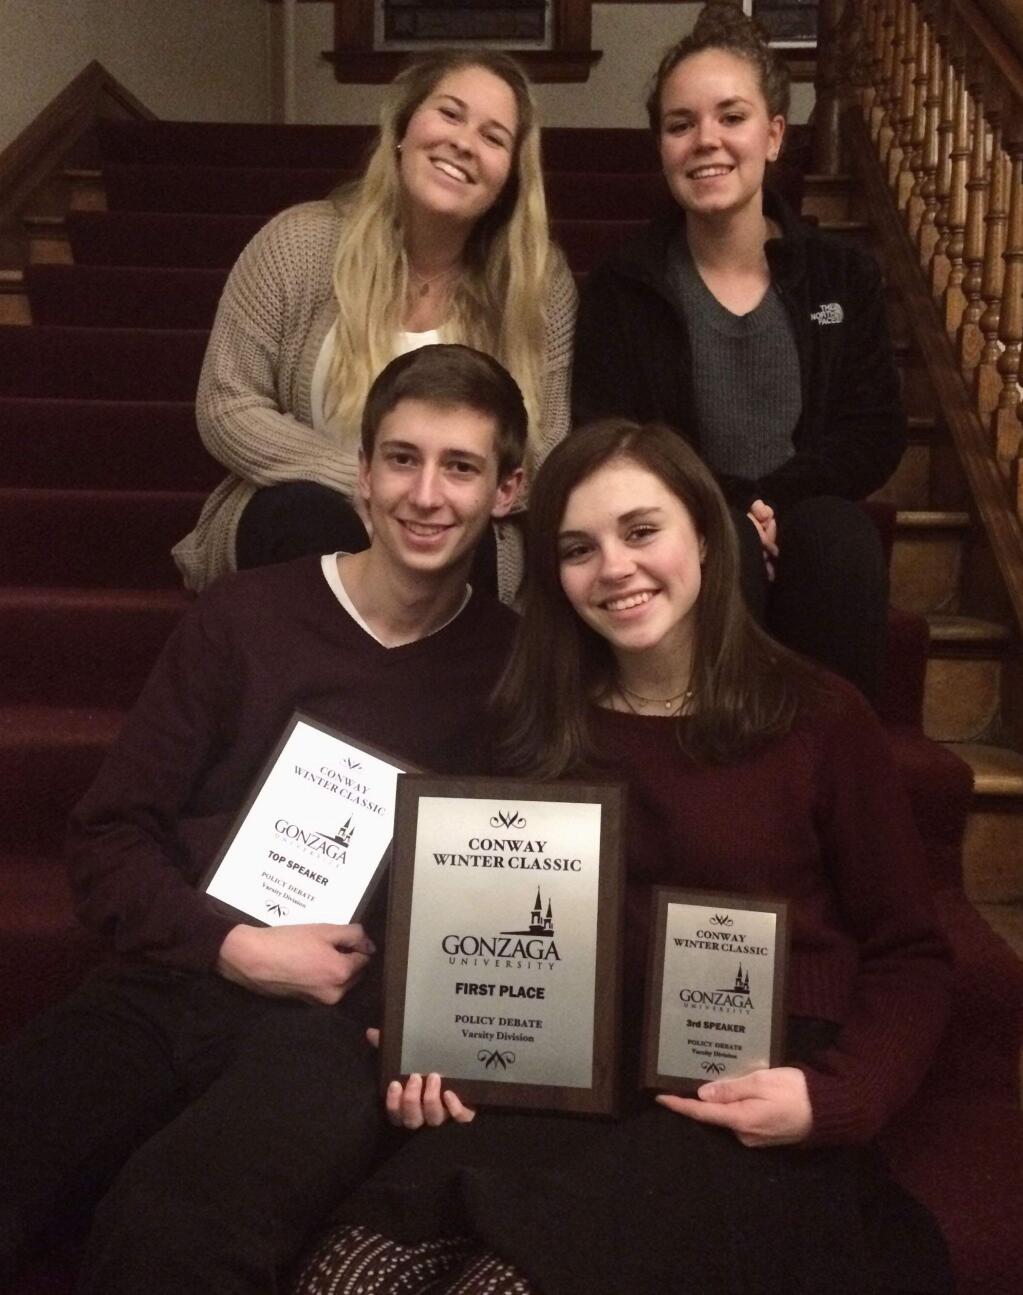 PHOTO COURTESEY ST. VINCENT DEPAUL HIGH SCHOOLThe St. Vincent DePaul High School debate team of Adam Martin and Julia Hunter, bottom, is ranked among the top five in the nation. The team of Sara Parks and Allison Ramos, top, is also enjoying a successful year.